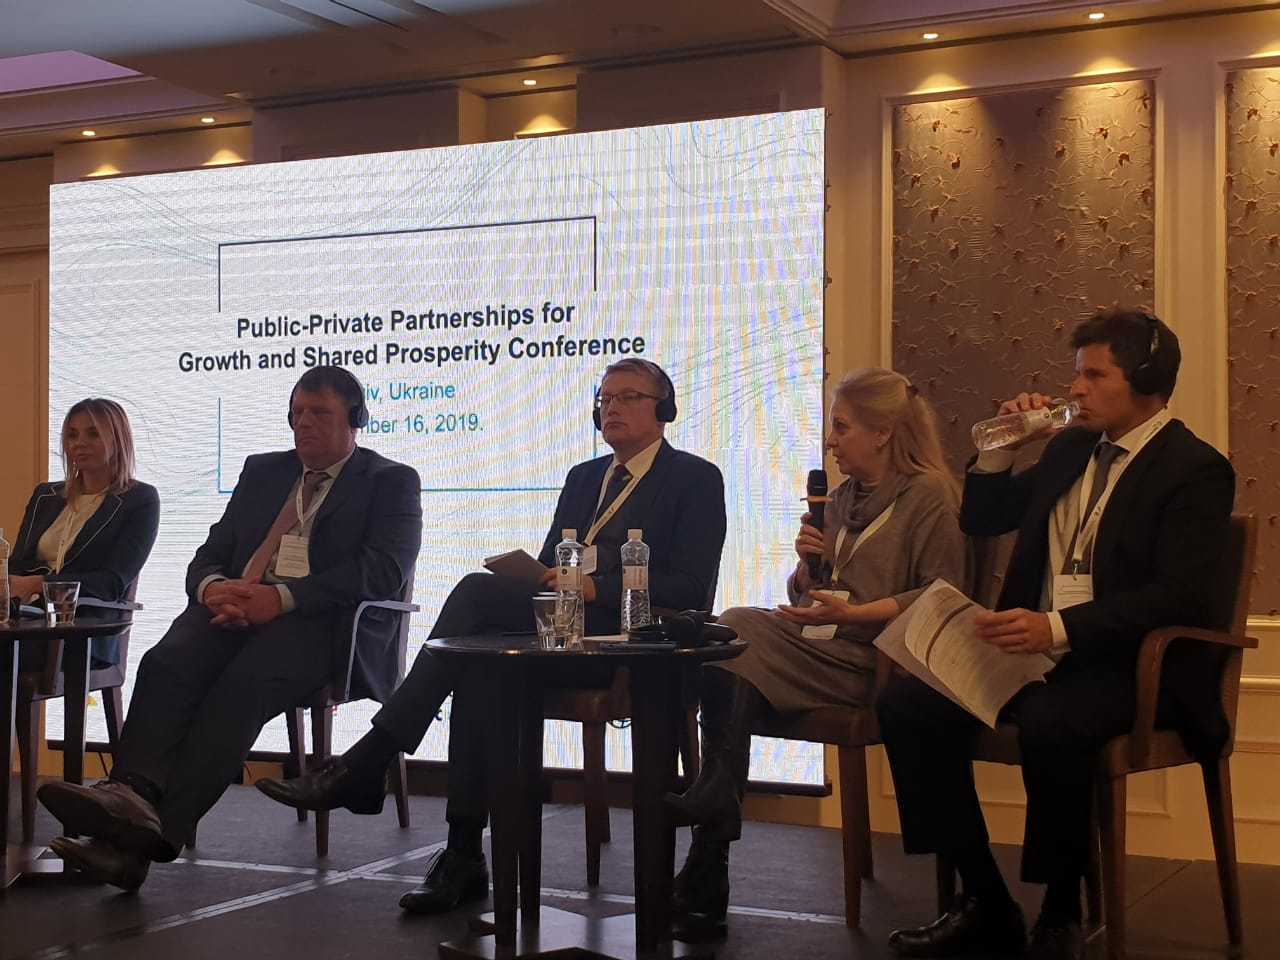 On 16 December 2019 the conference”Public-Private Partnership for Growth and Overall Prosperity” took place